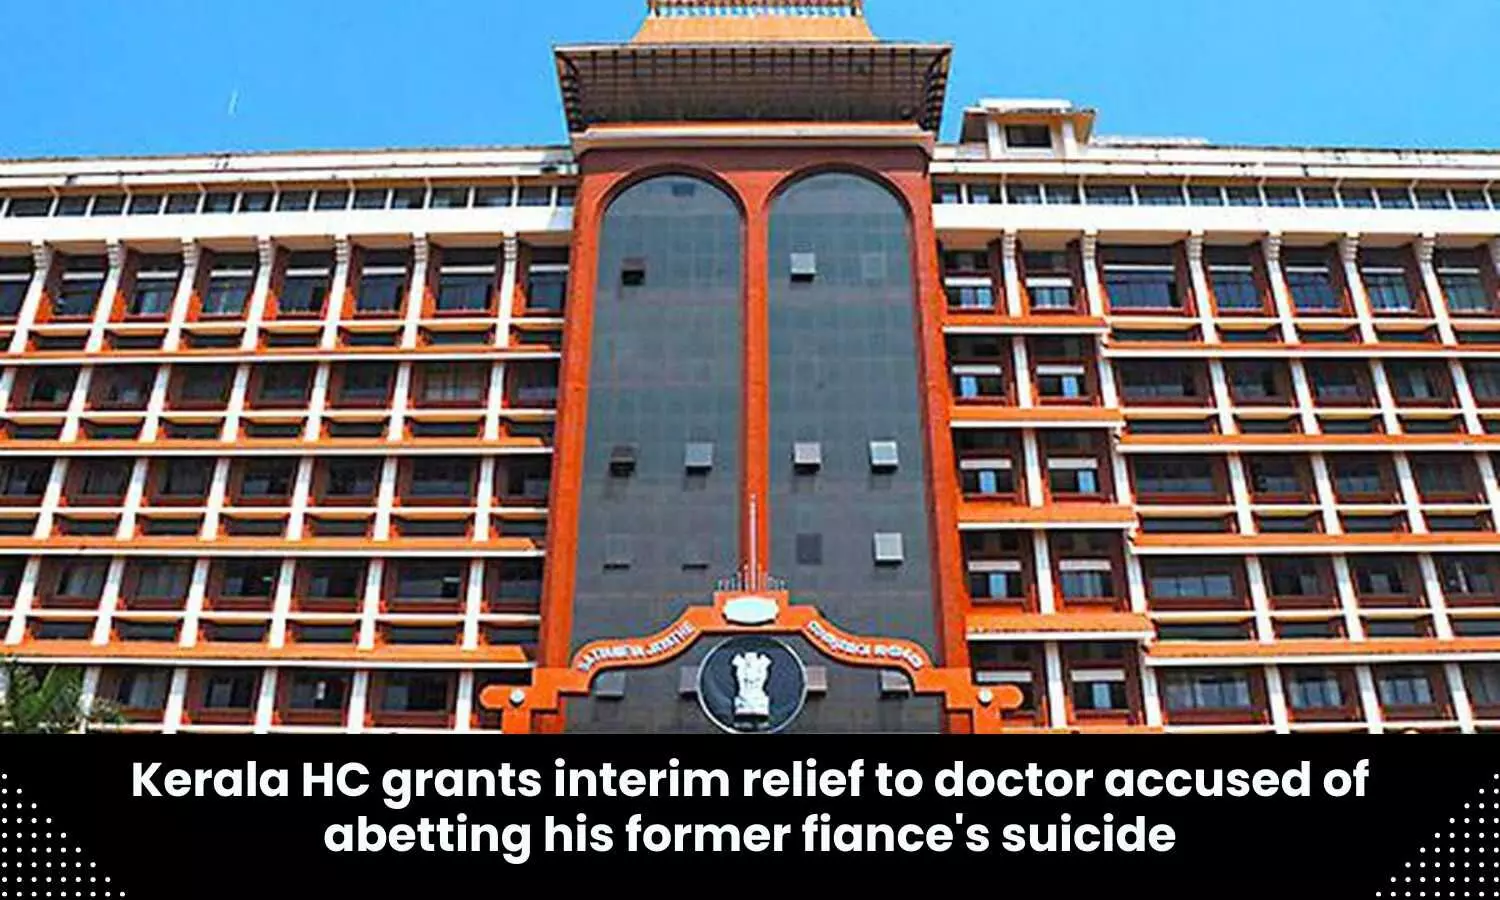 Kerala HC grants interim relief to doctor accused of abetting his former fiances suicide